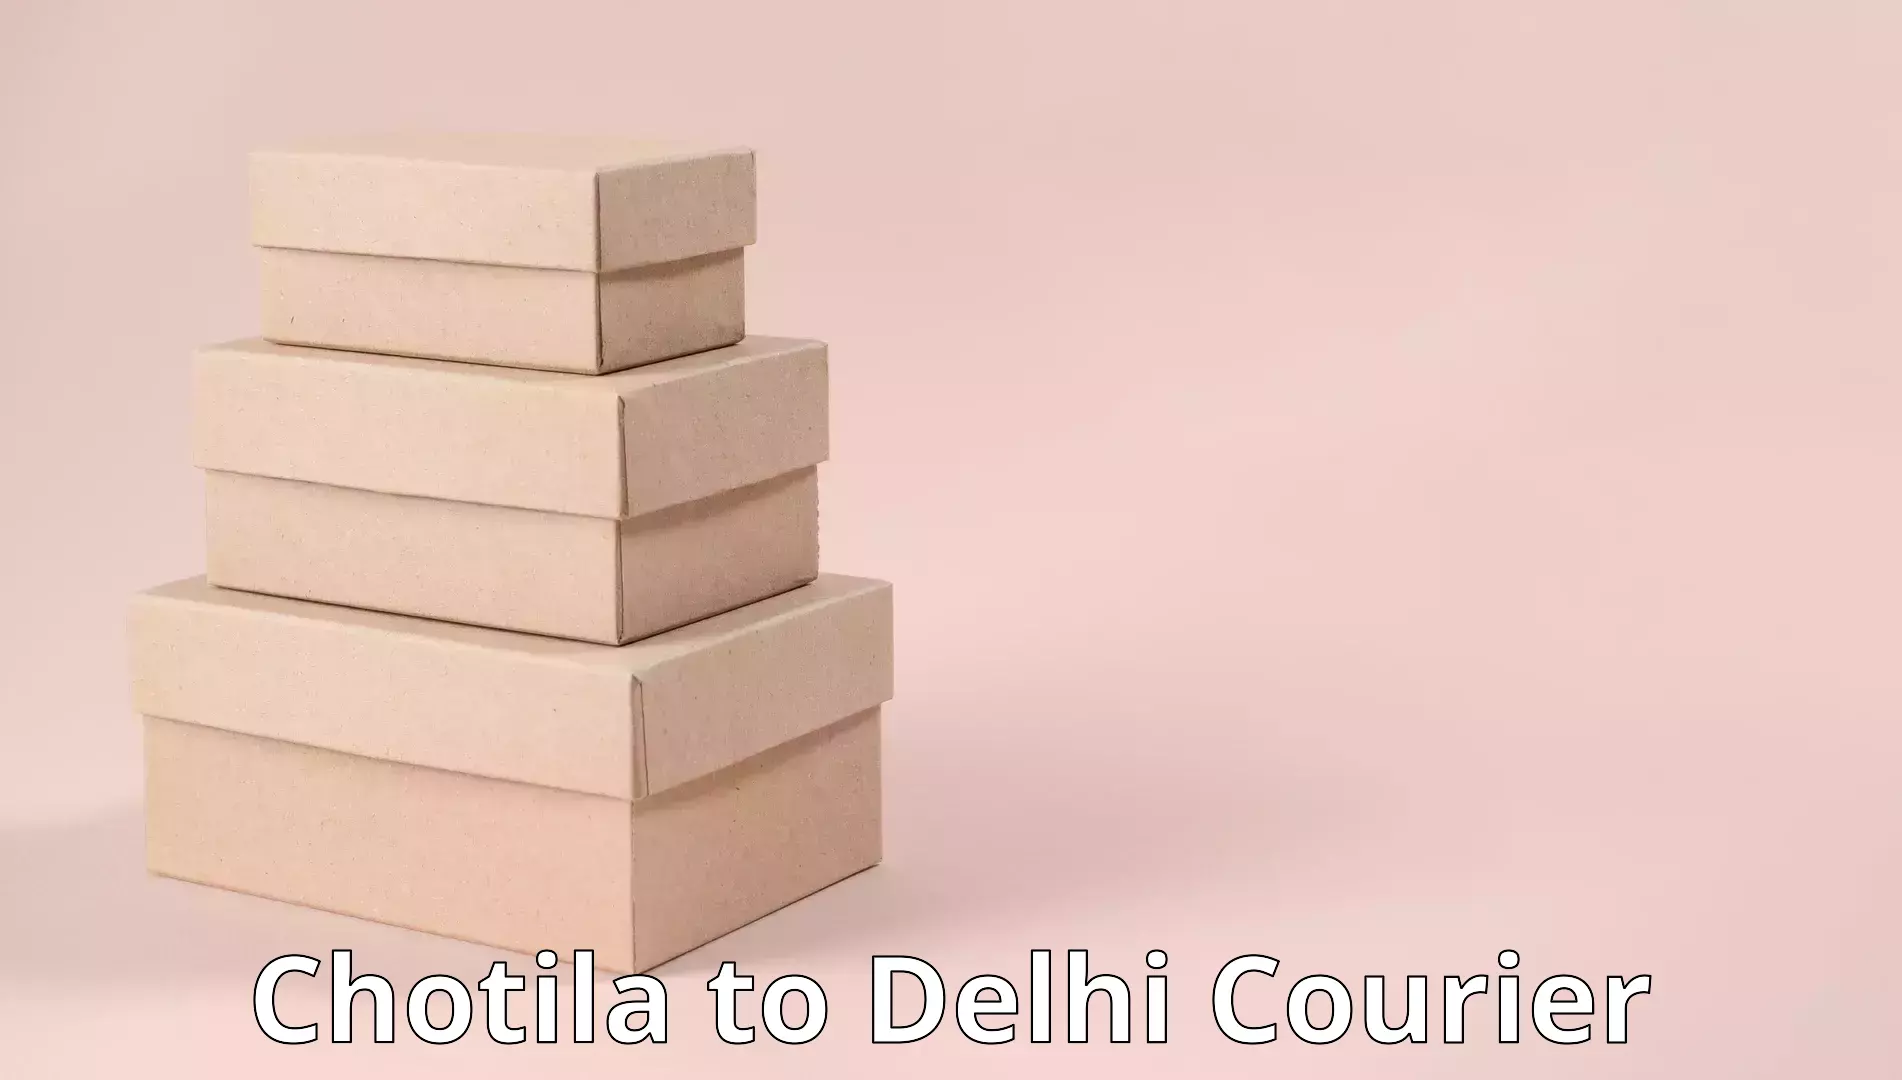 Professional home movers in Chotila to University of Delhi